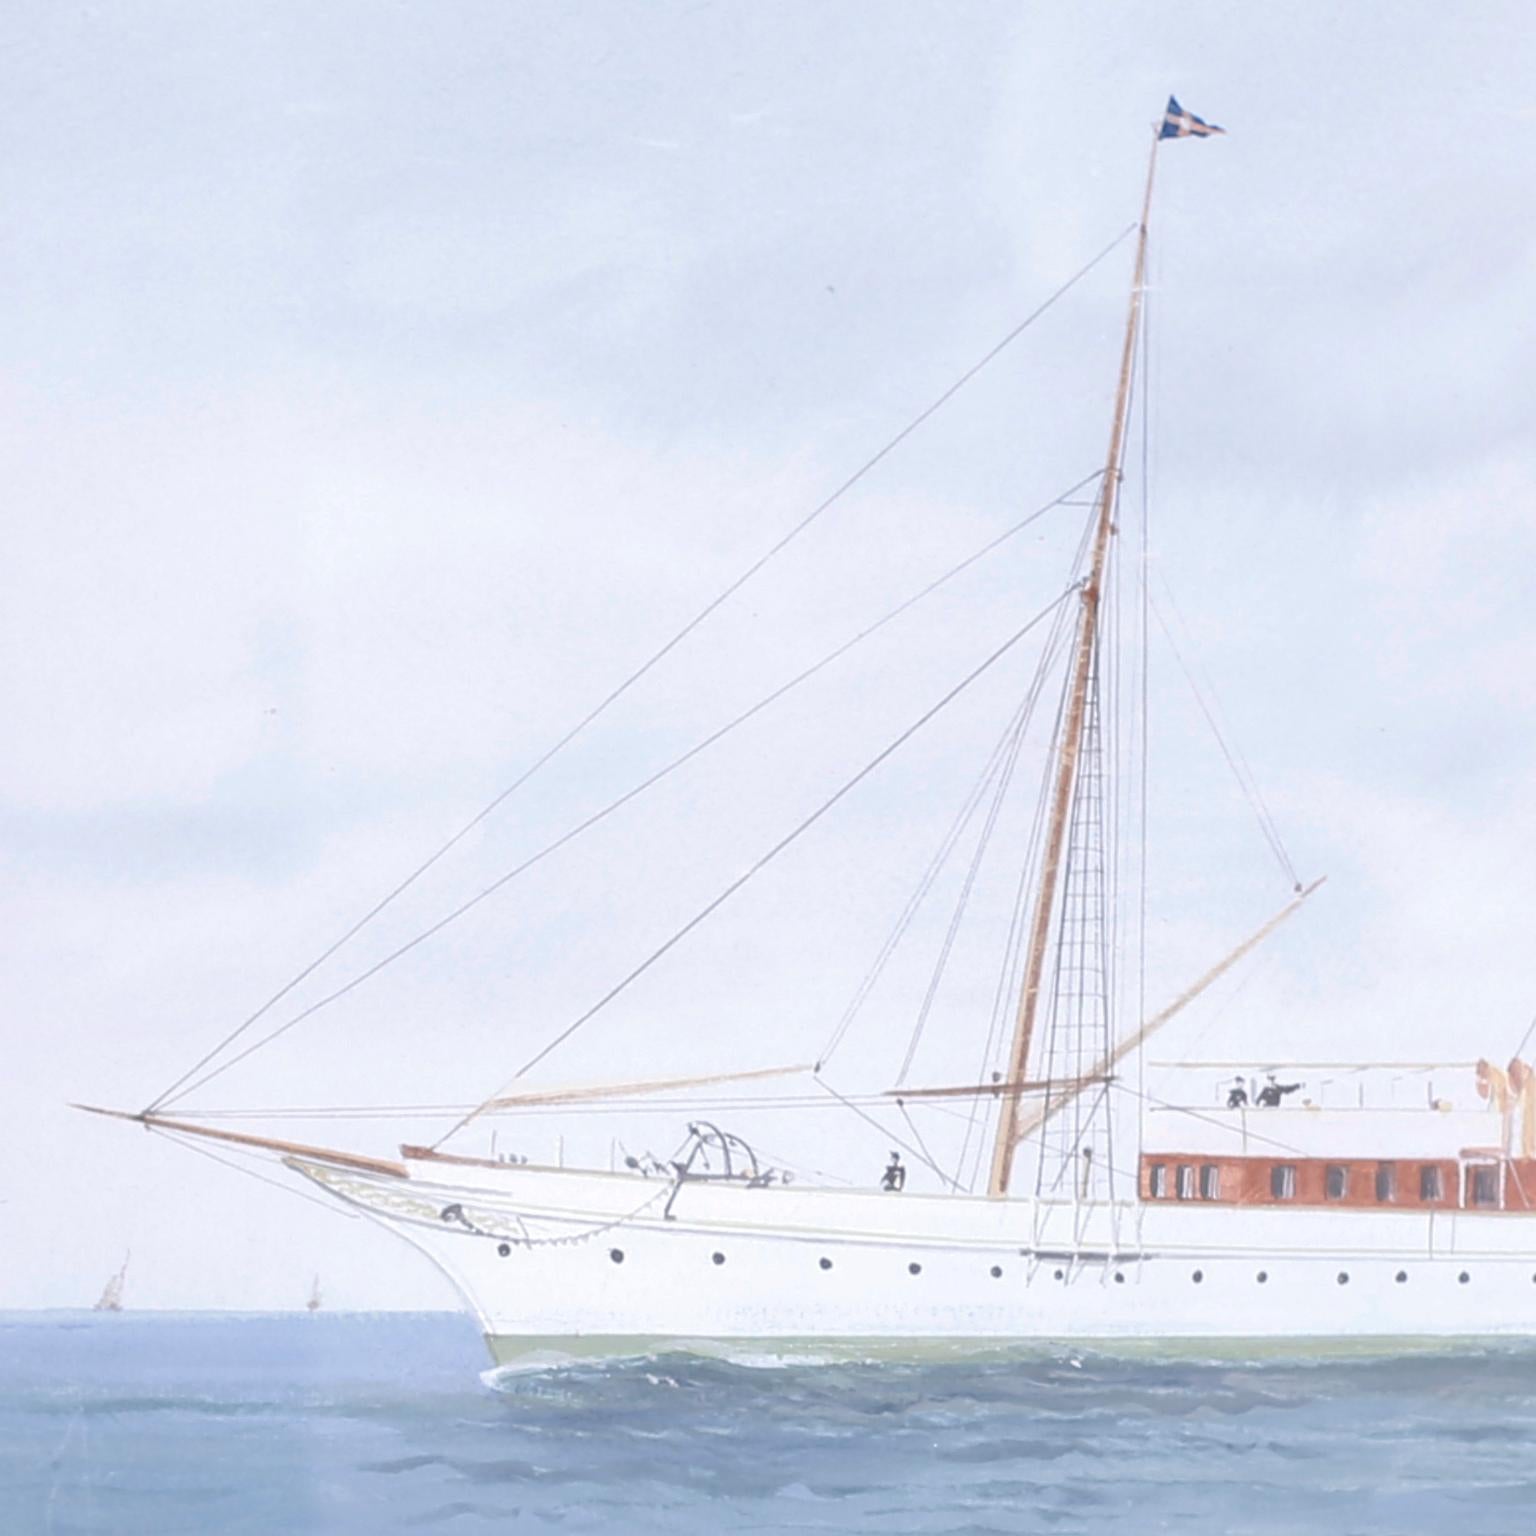 Gouache painting on paper of the steam sail yacht 